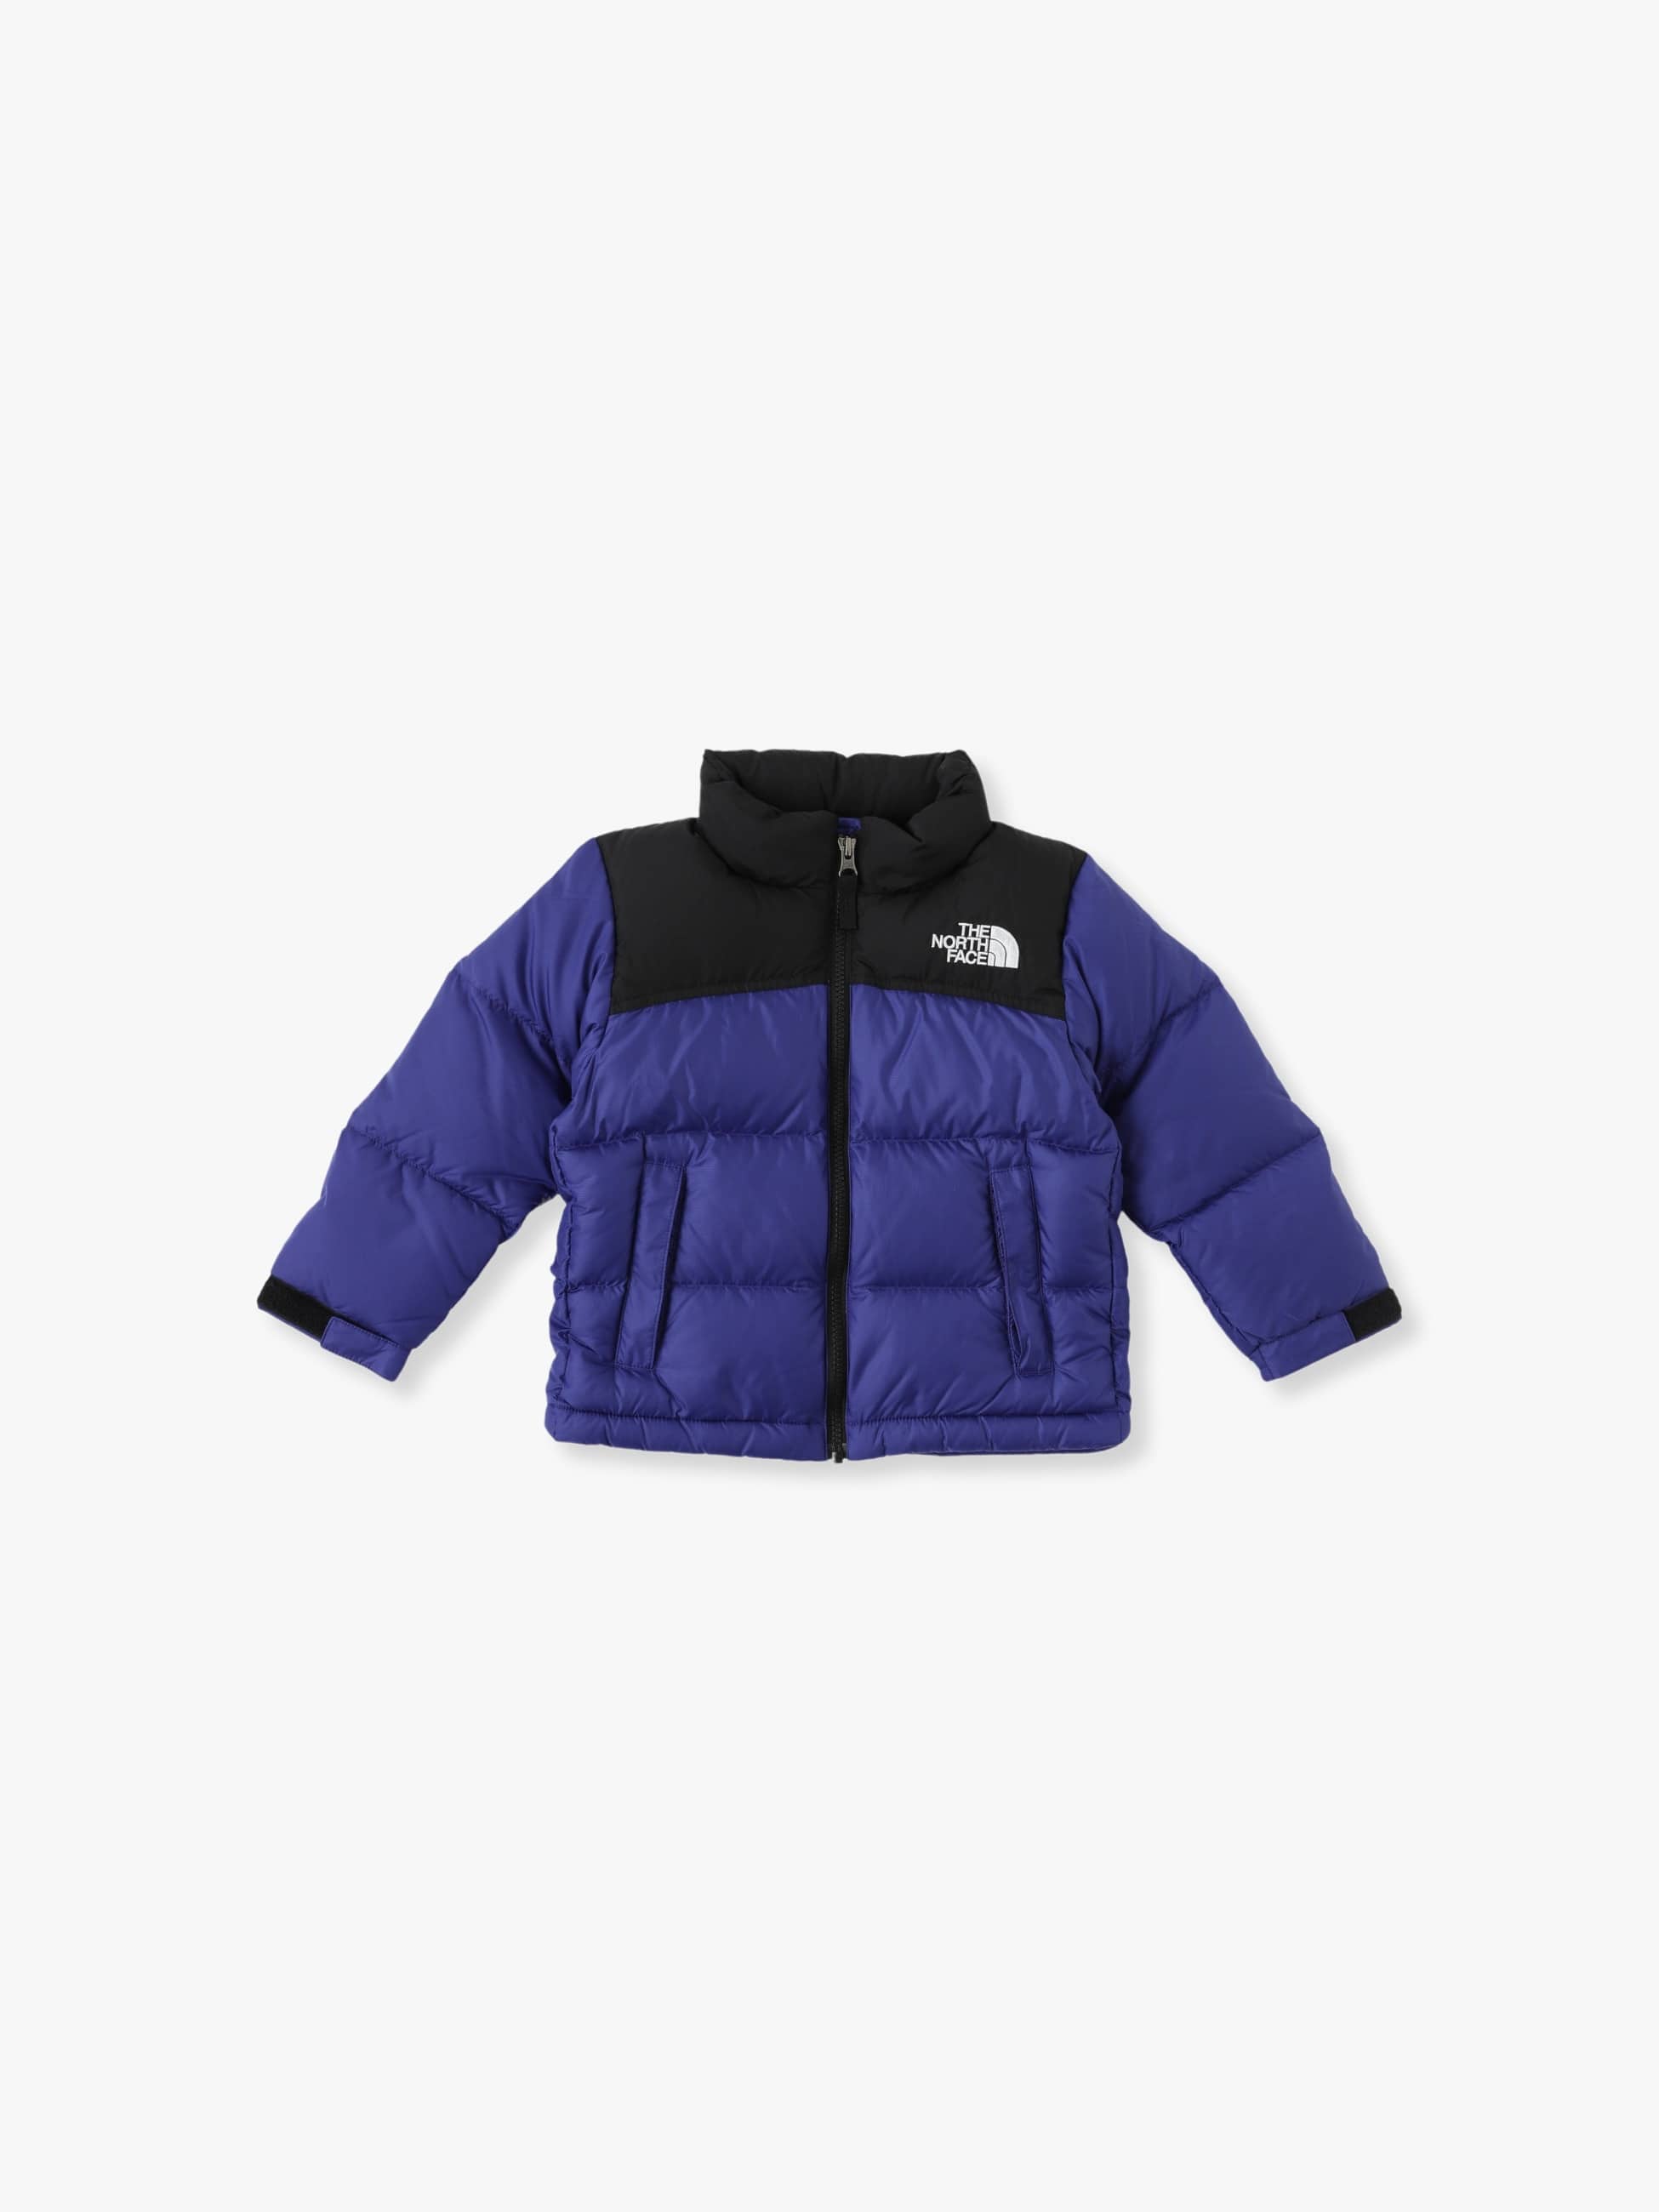 Ron Herman THE NORTH FACE Fleece jacketブルゾン